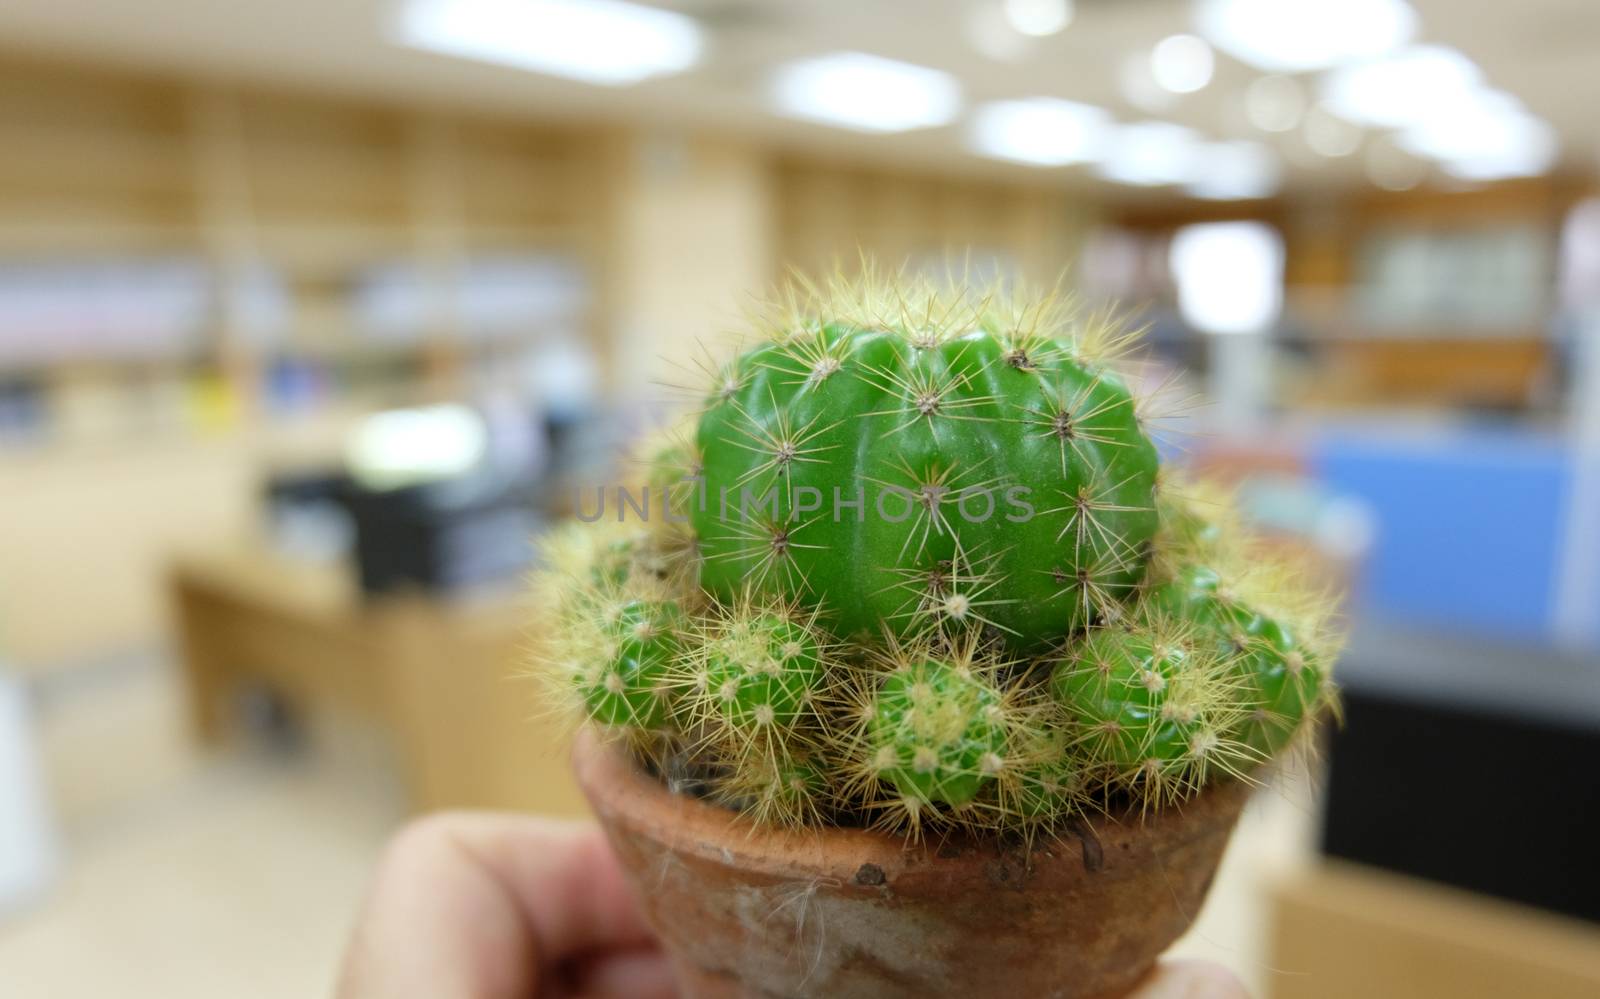 Cactus on hand in office